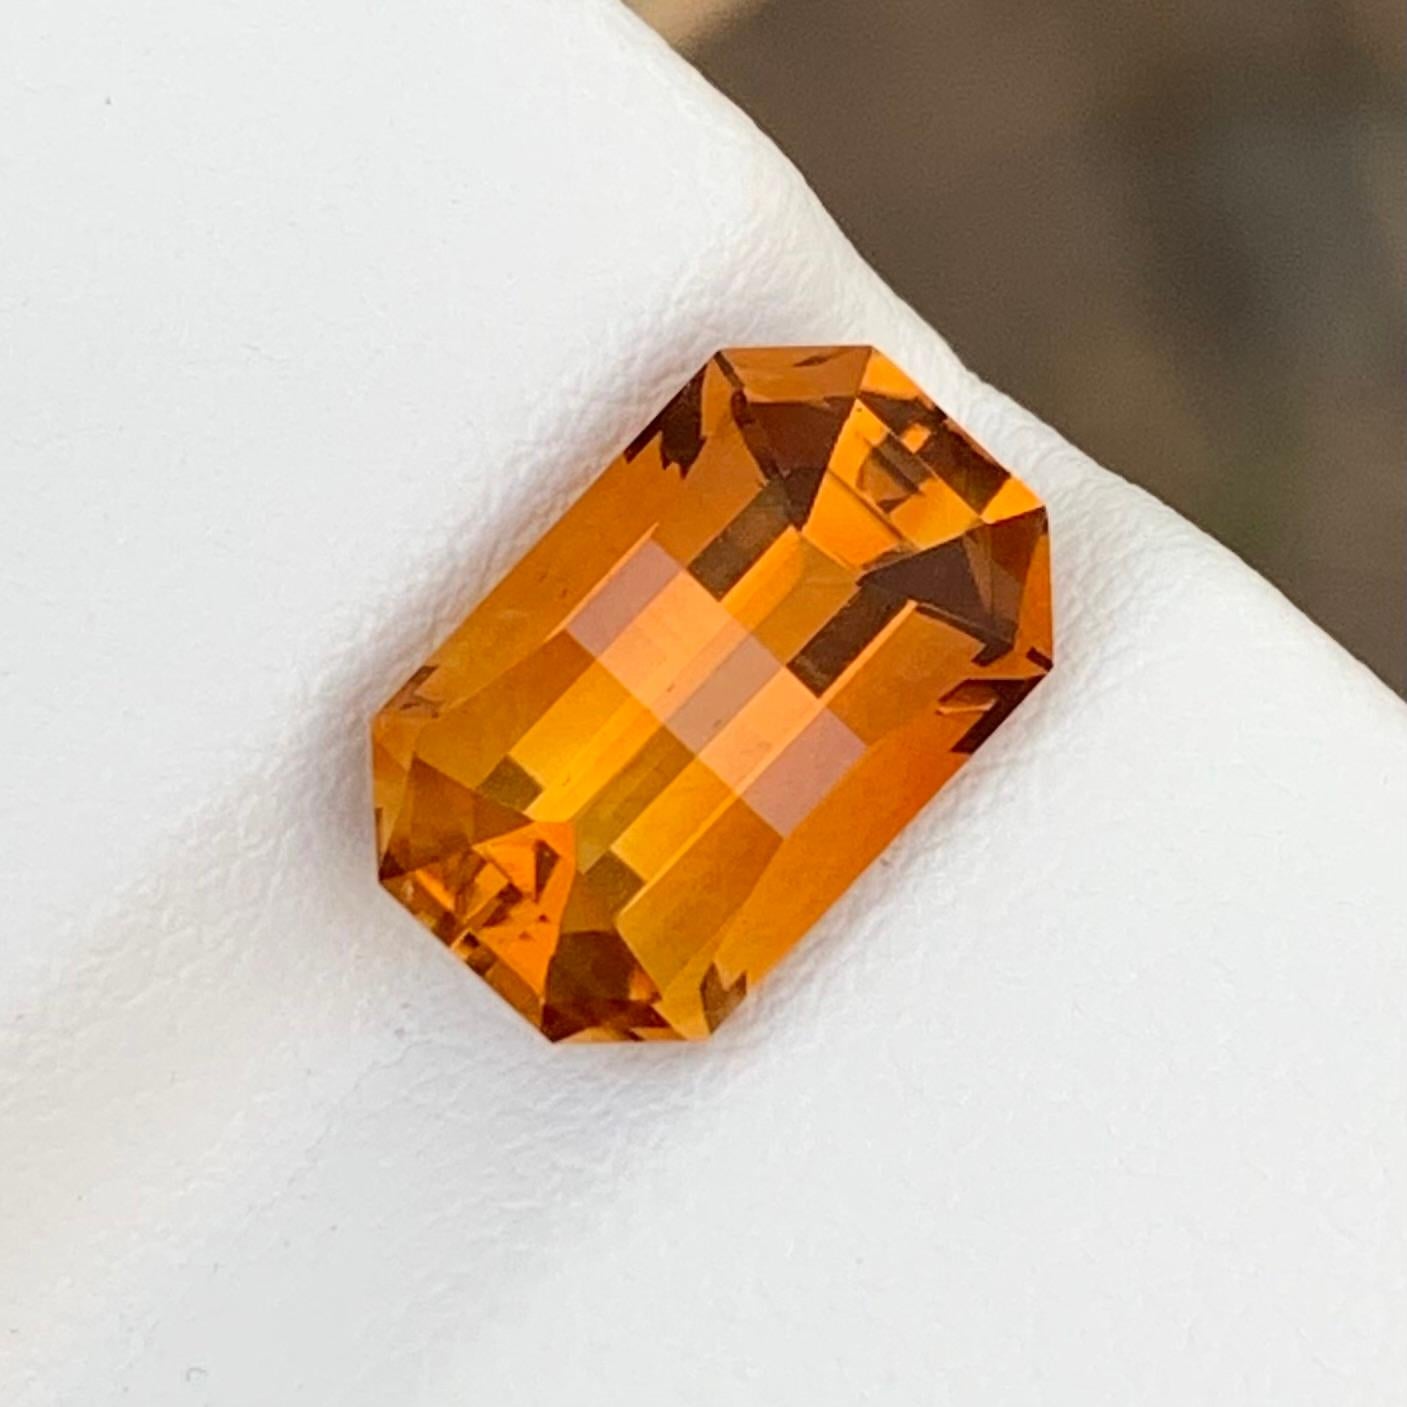 Loose Madeira Citrine
Weight: 3.15 Carats
Dimension: 11.3 x 7.1 x 6 Mm
Colour: Orange
Cut: Smith Bar Cut \ Pixelated Cut 
Certificate: On Demand

Madeira citrine, a gemstone named after the rich and warm tones resembling the fortified wine from the